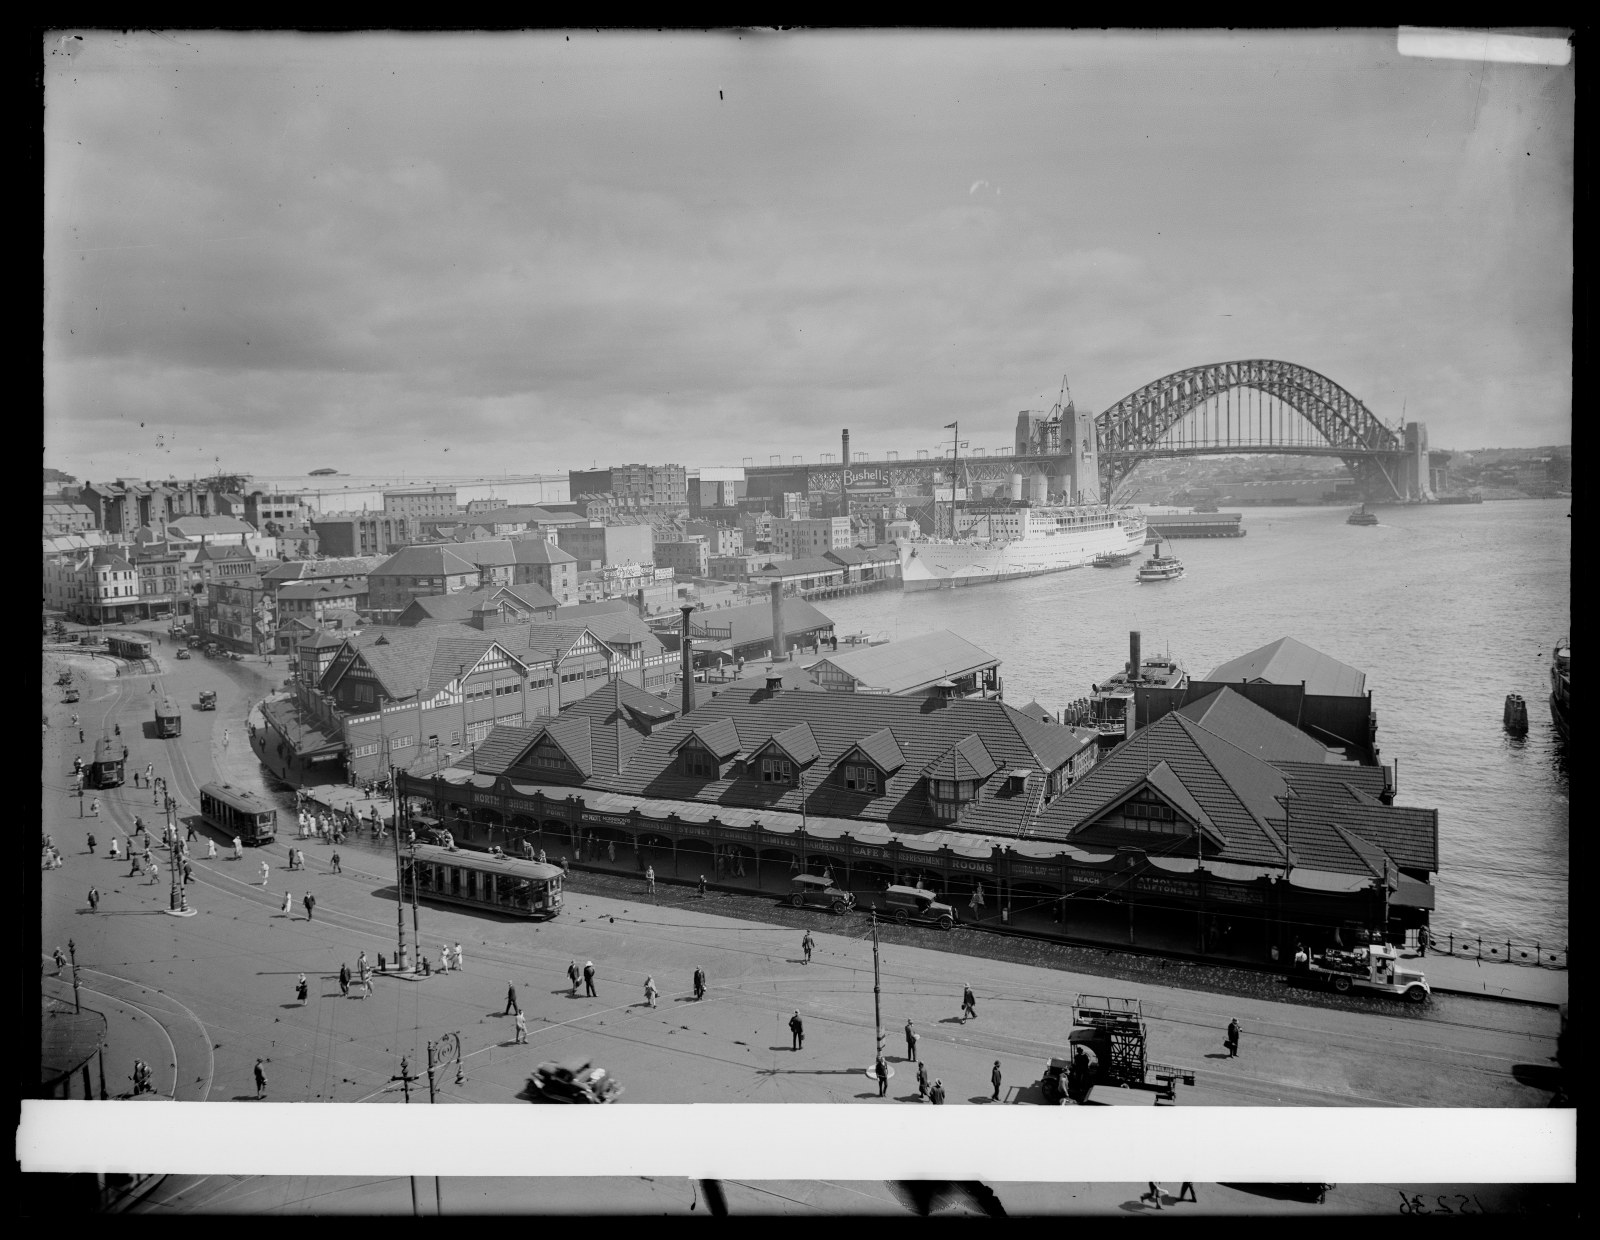 Government Printing Office d1_03860 - Circular Quay Showing Strathnaver, and Sydney Harbour Bridge [From NSW Government Printer series: City Views], 1931